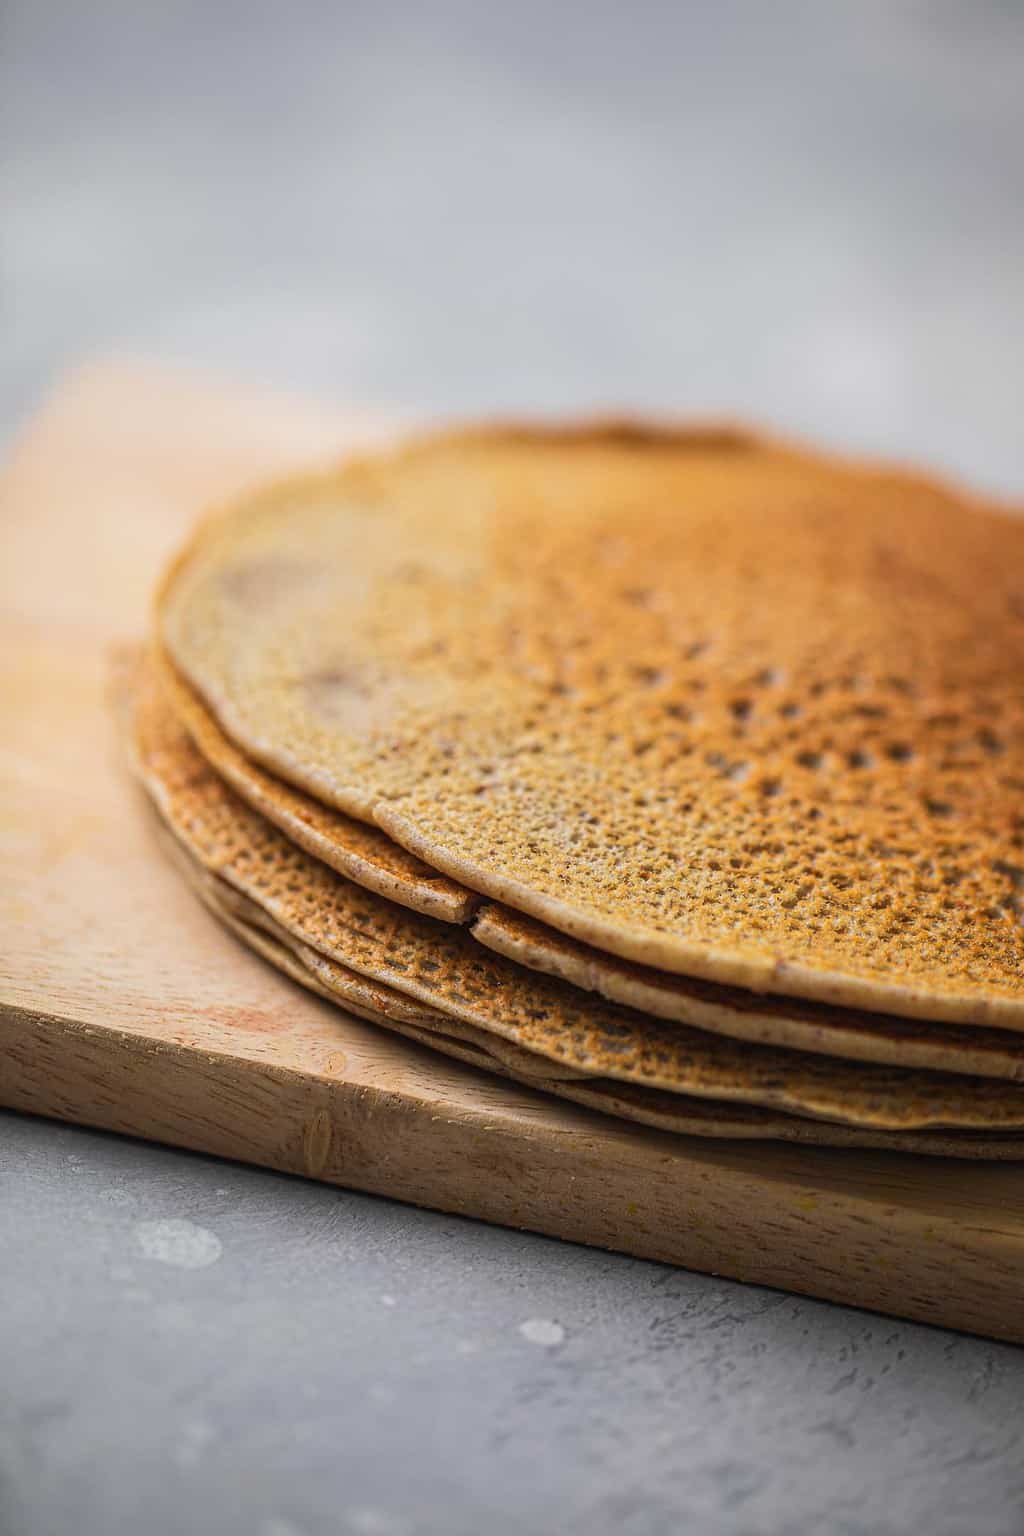 Buckwheat crepes resting on a wooden chopping board